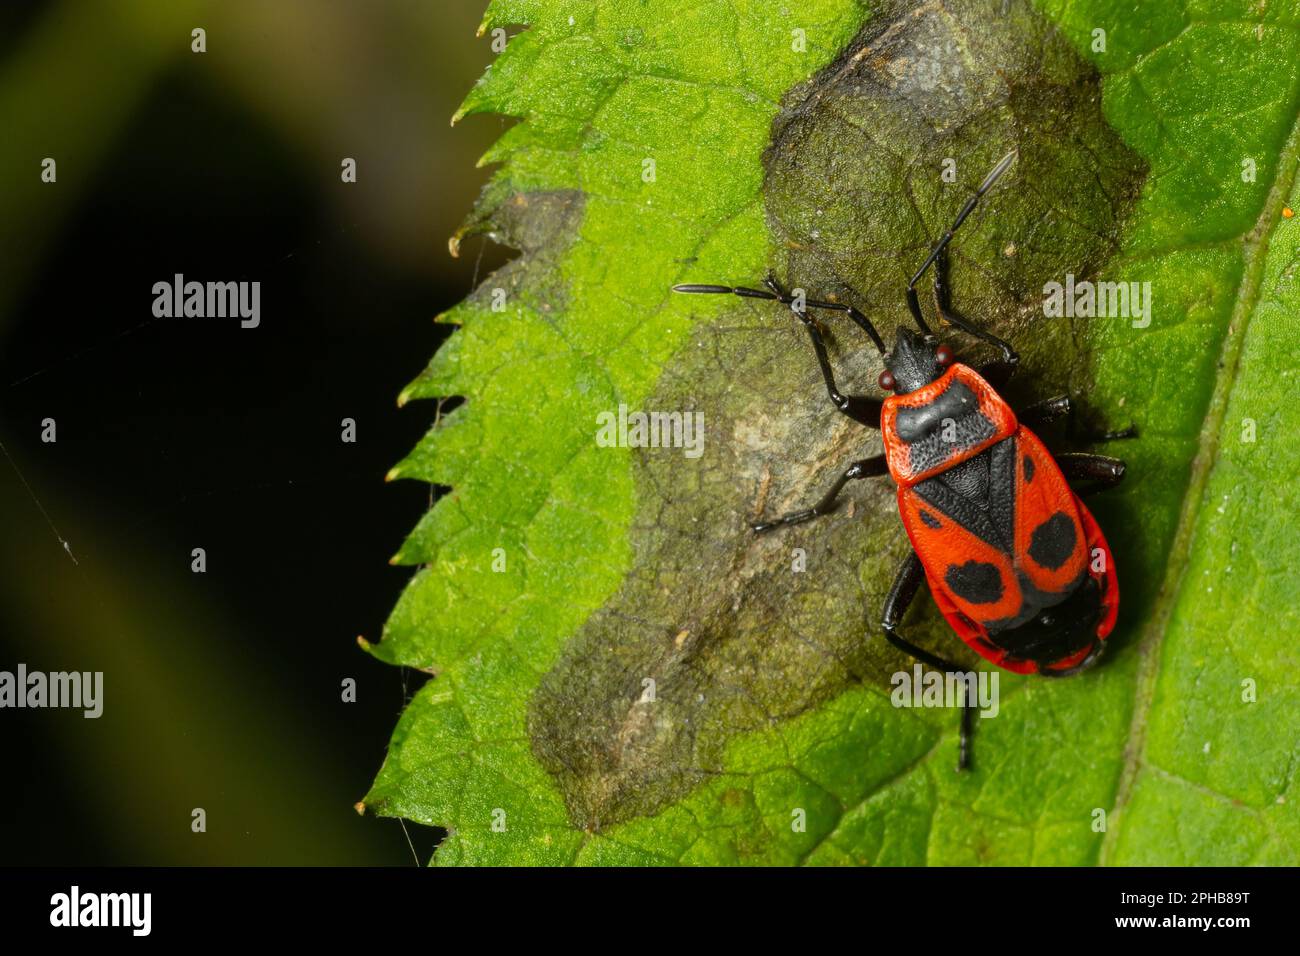 Natural closeup on the red firebug, Pyrrhocoris apterus sitting on a leaf in the garden. Stock Photo